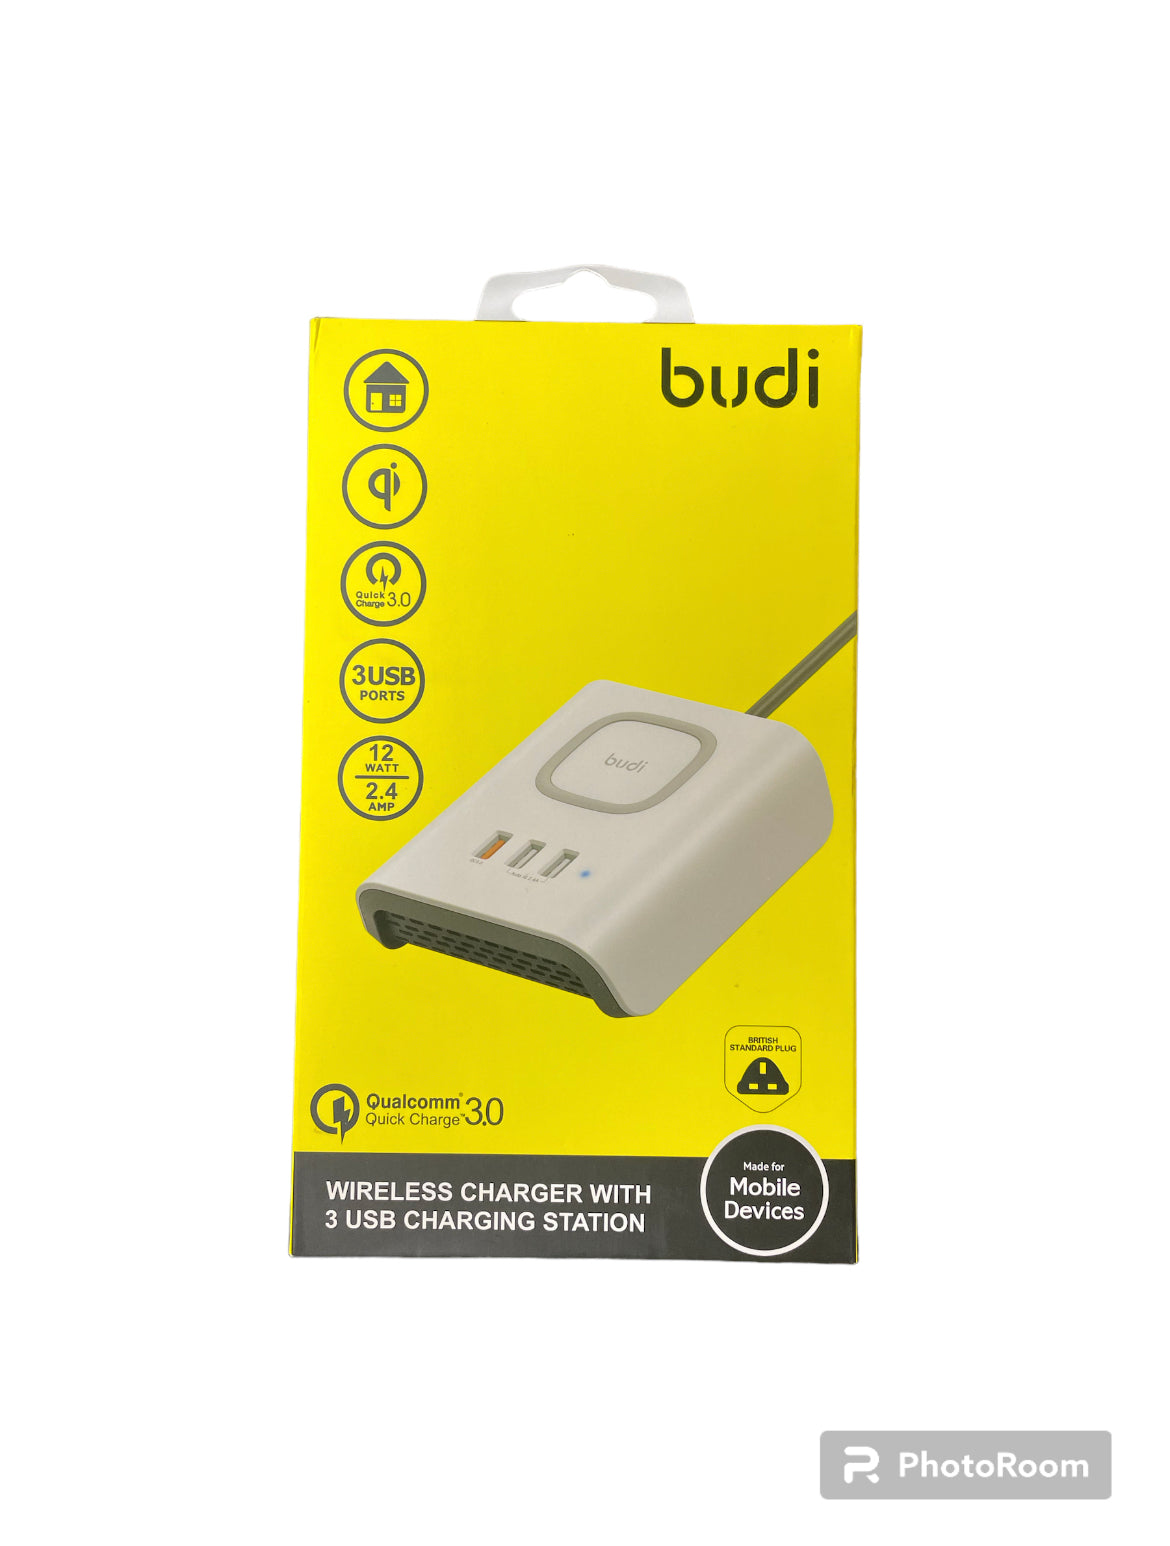 Budi Wireless Charger with 3 usb ports